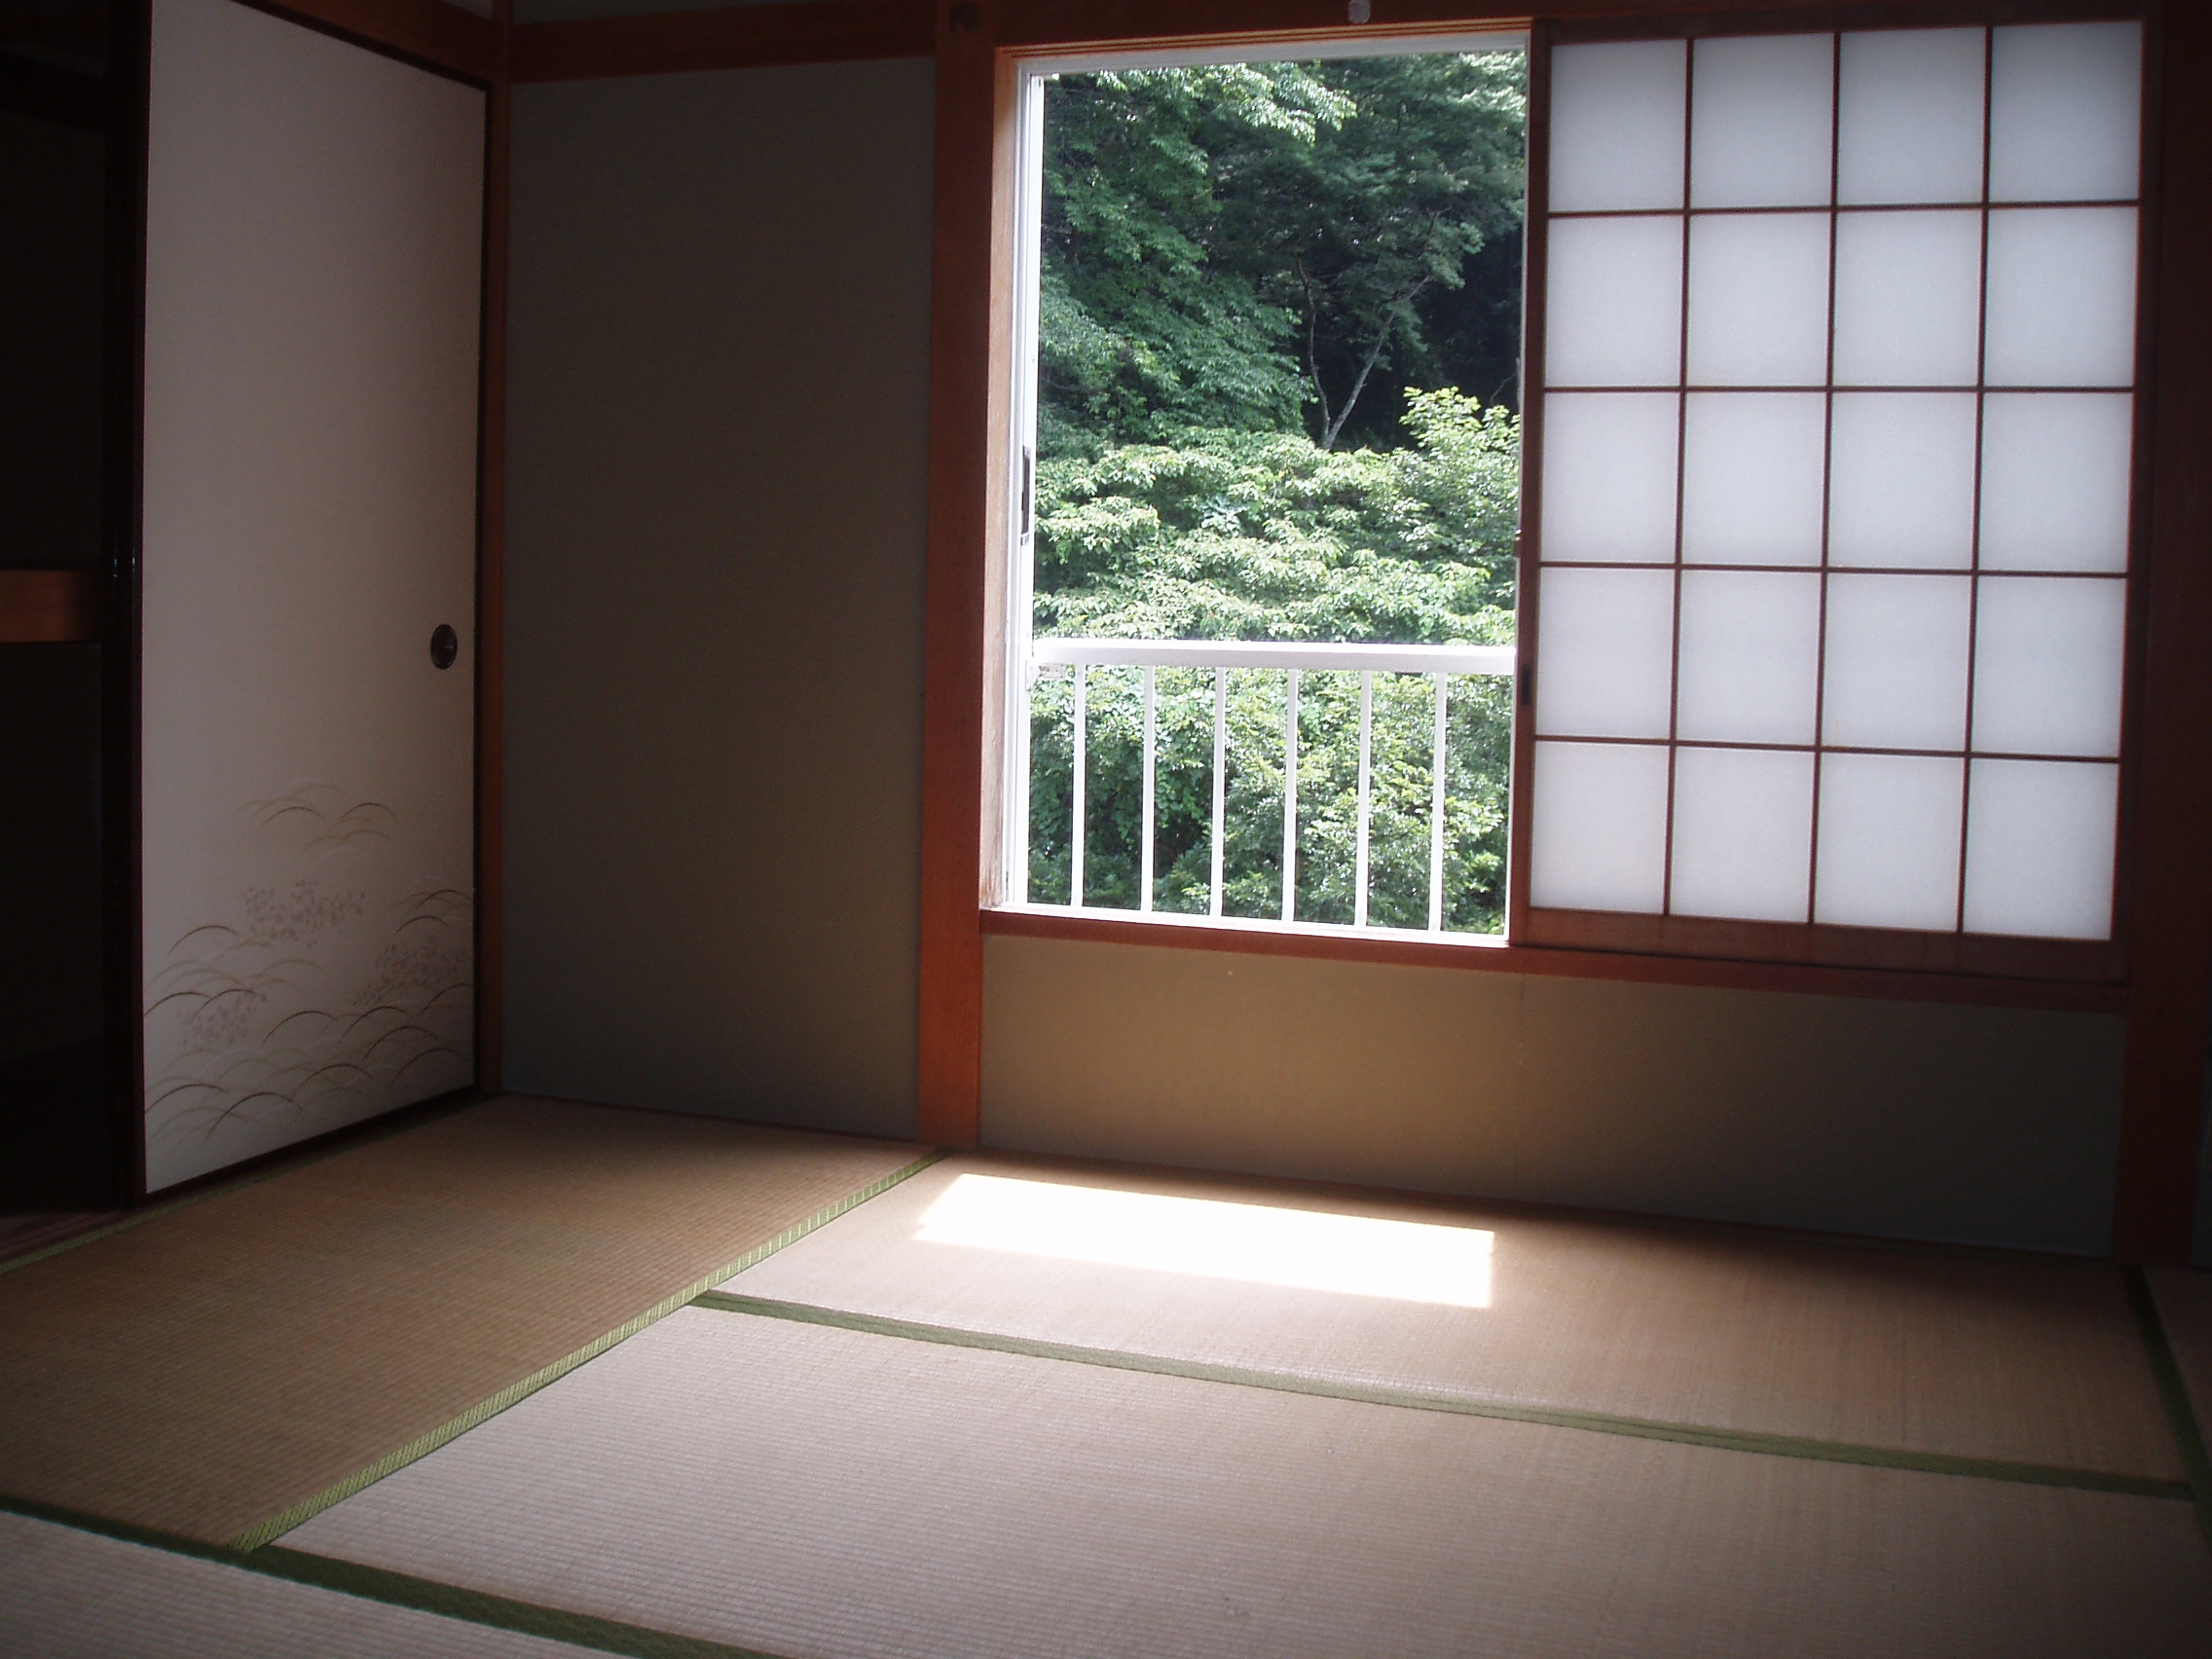 Living and room. Kitchen sequence of Japanese-style room